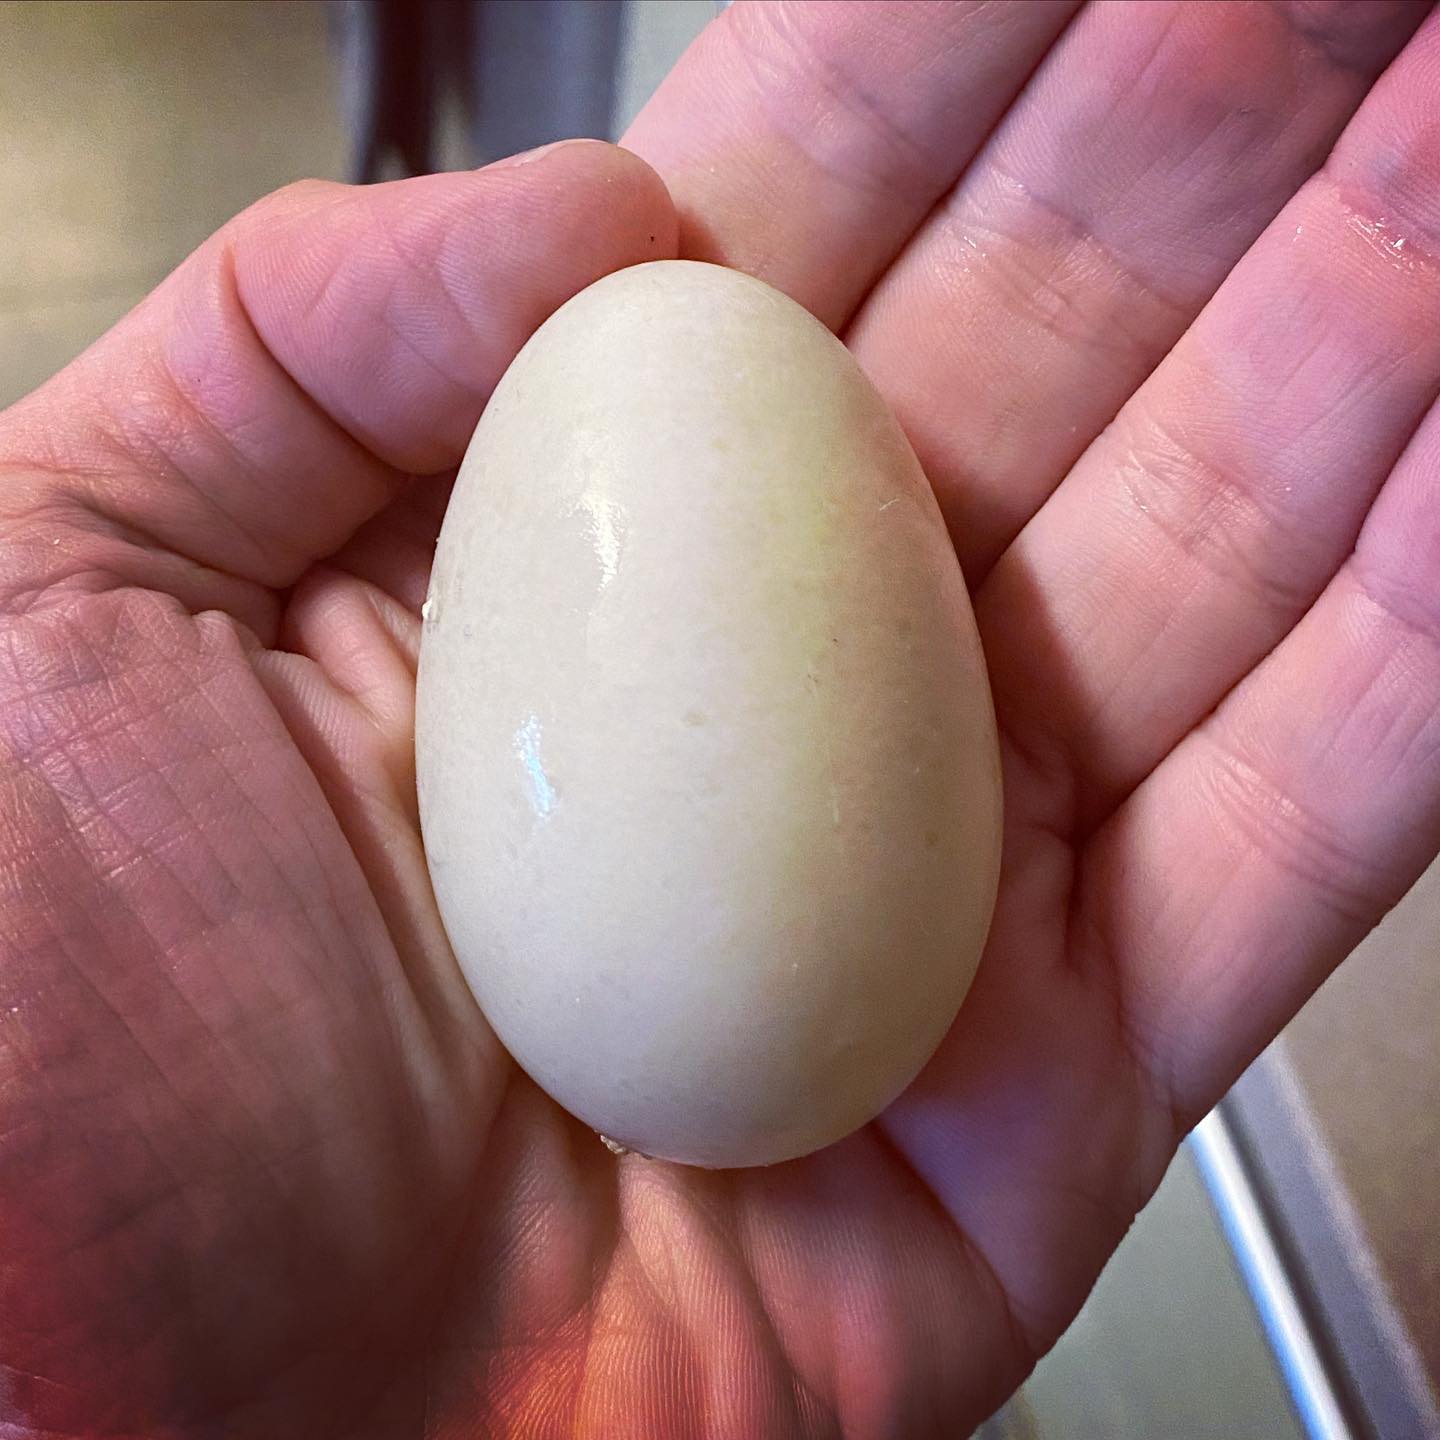 Yay 😀 my ducks started to lay eggs, my first duck 🦆 egg 🥚… Will be dinner tonight!!